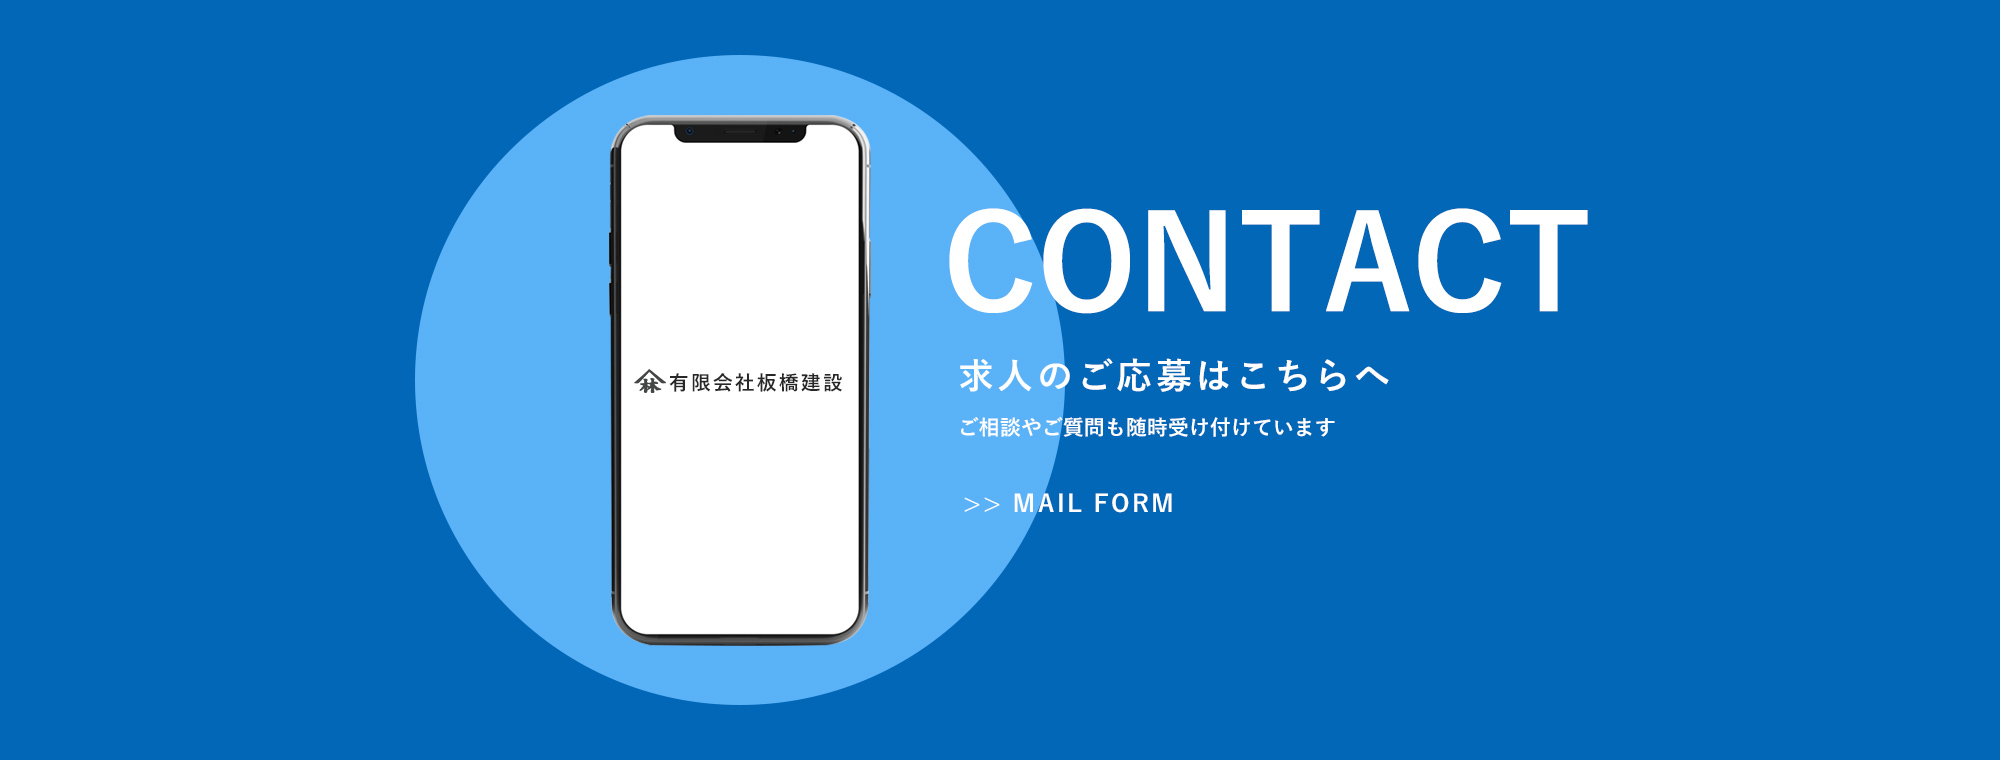 contact_banner_01